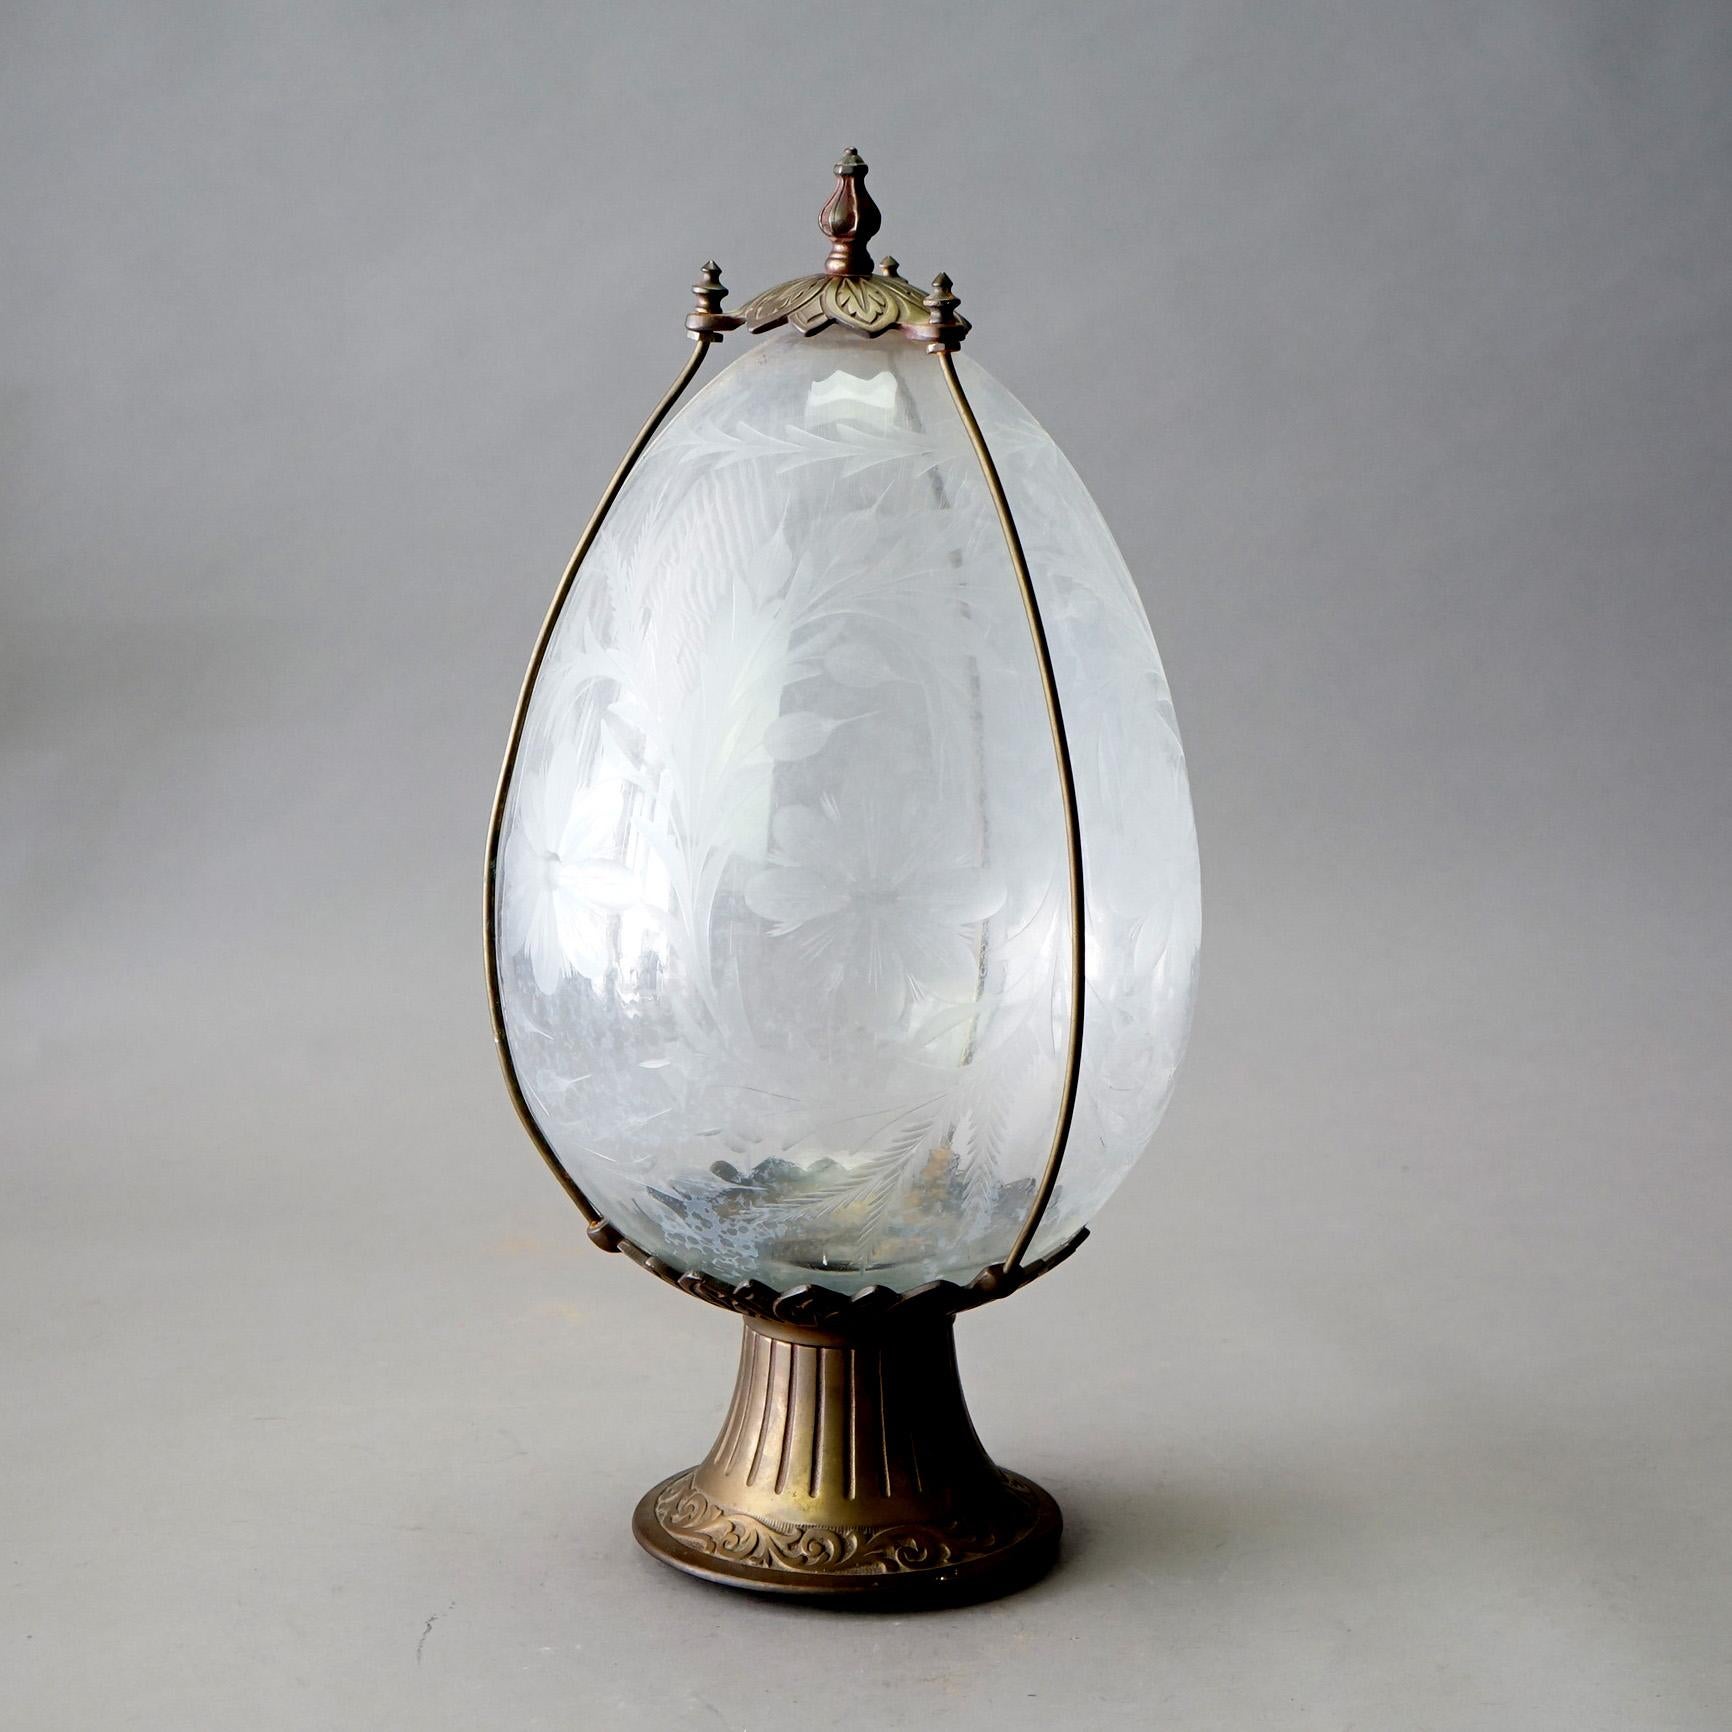 An antique and large drug store apothecary show globe offers tear drop form glass globe having overall floral etched design and housed in a bronzed metal frame with engraved acanthus collar, c1925

Measures- 21.5''H x 10.5''W x 10.5''D

Catalogue